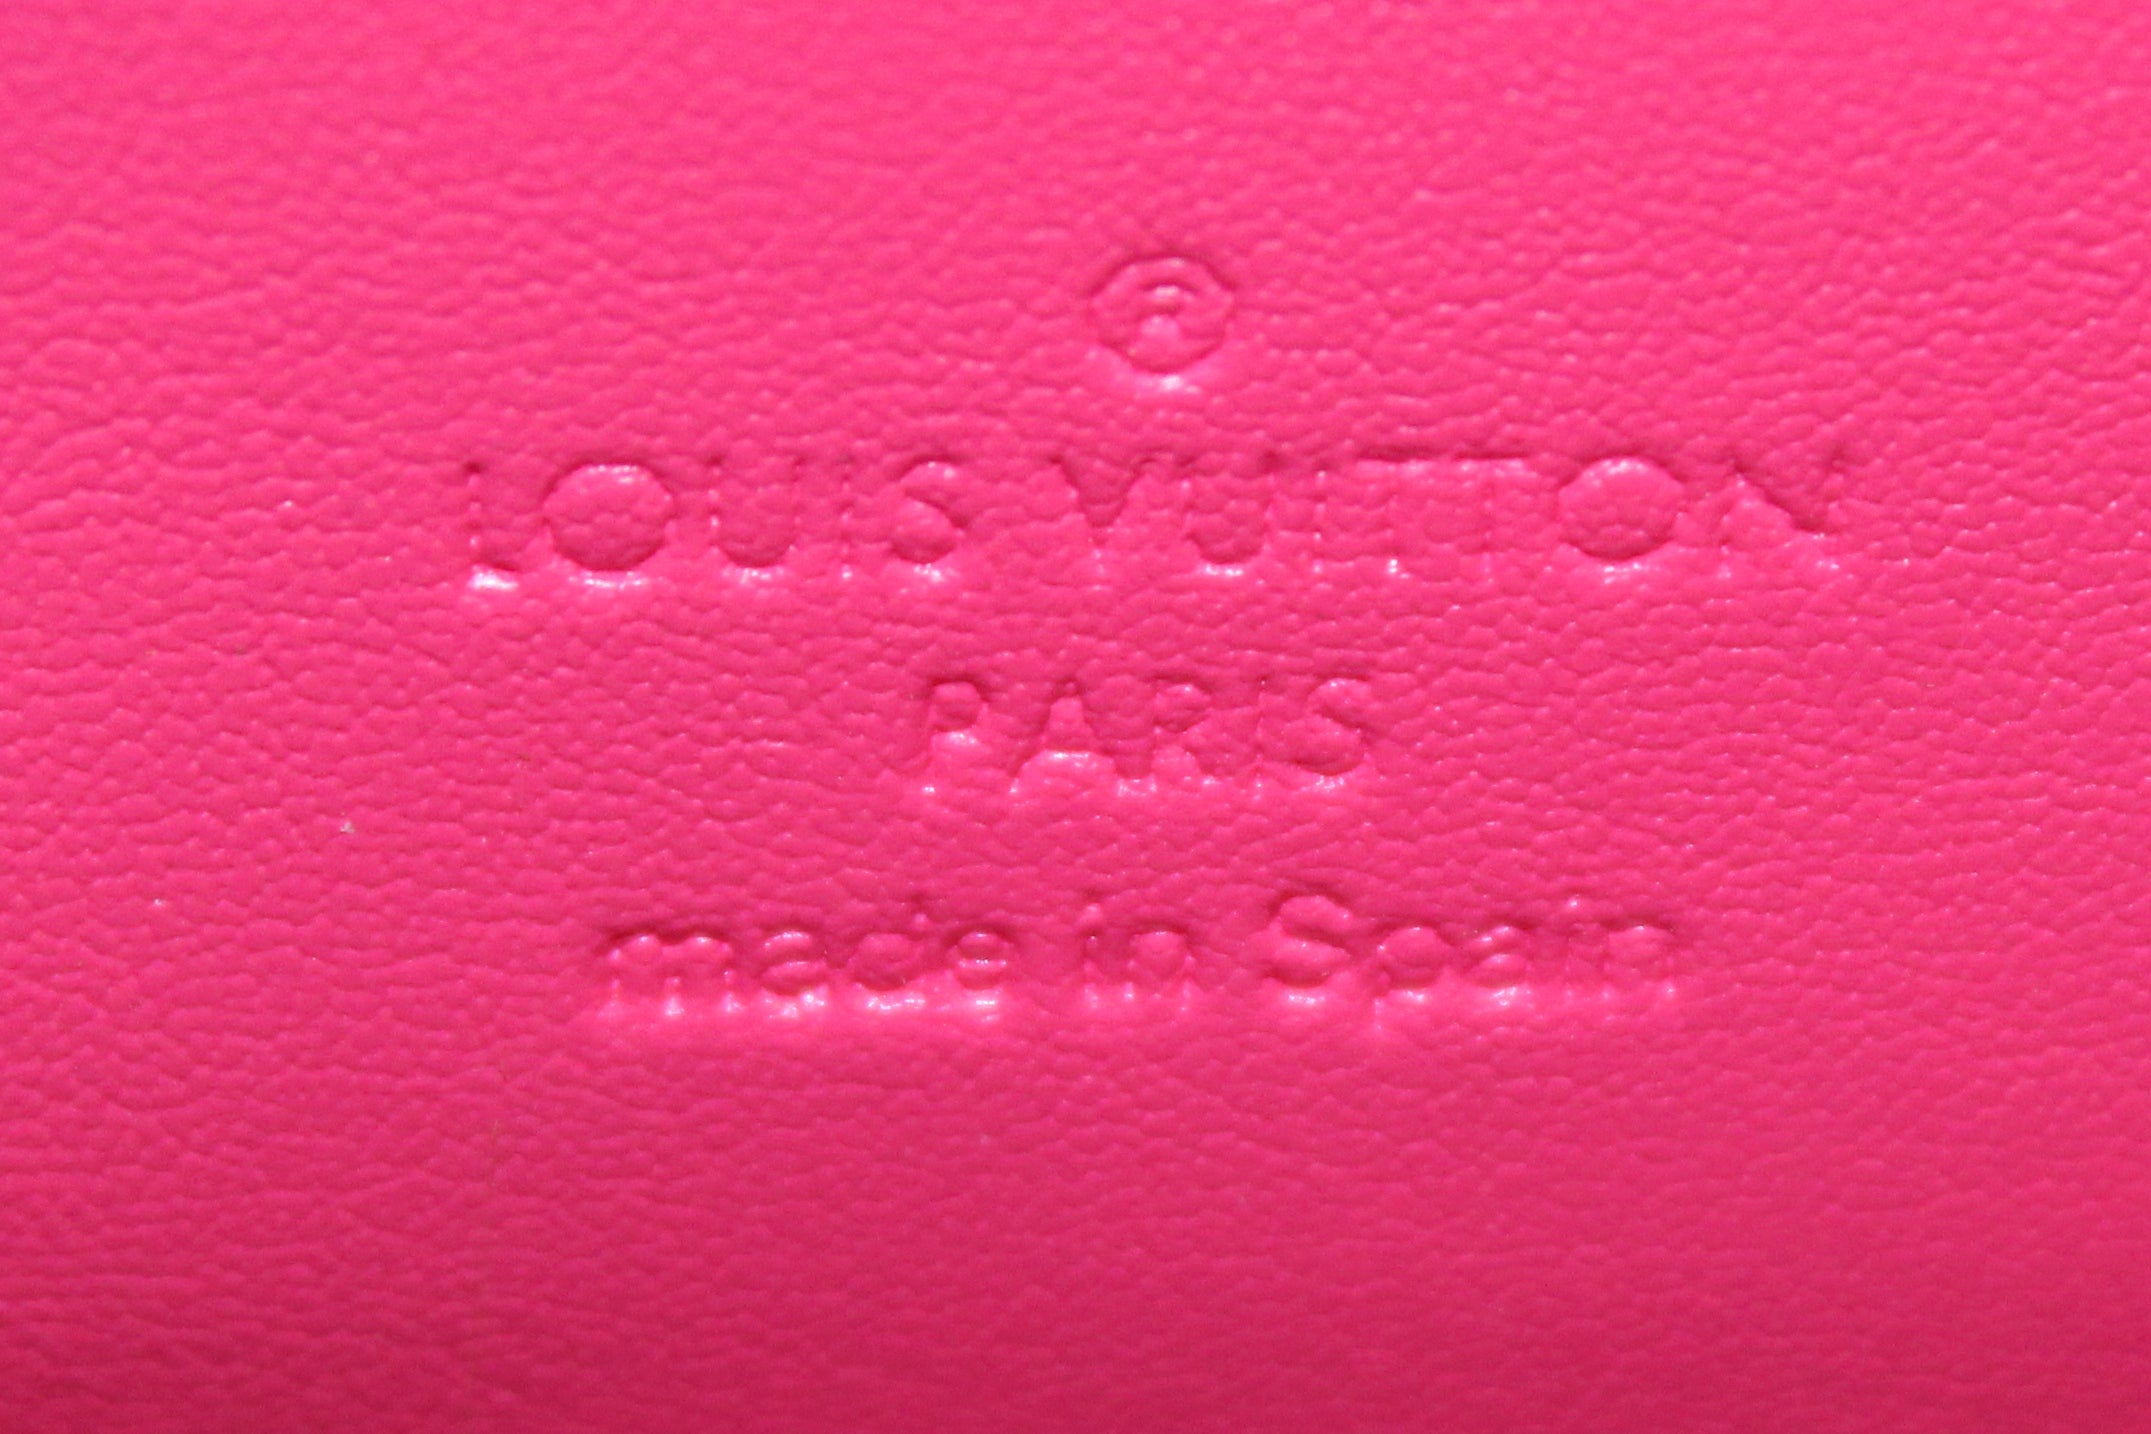 New Louis Vuitton Fuchsia Hot Pink Vernis Leather Houston Shoulder Bag –  Italy Station